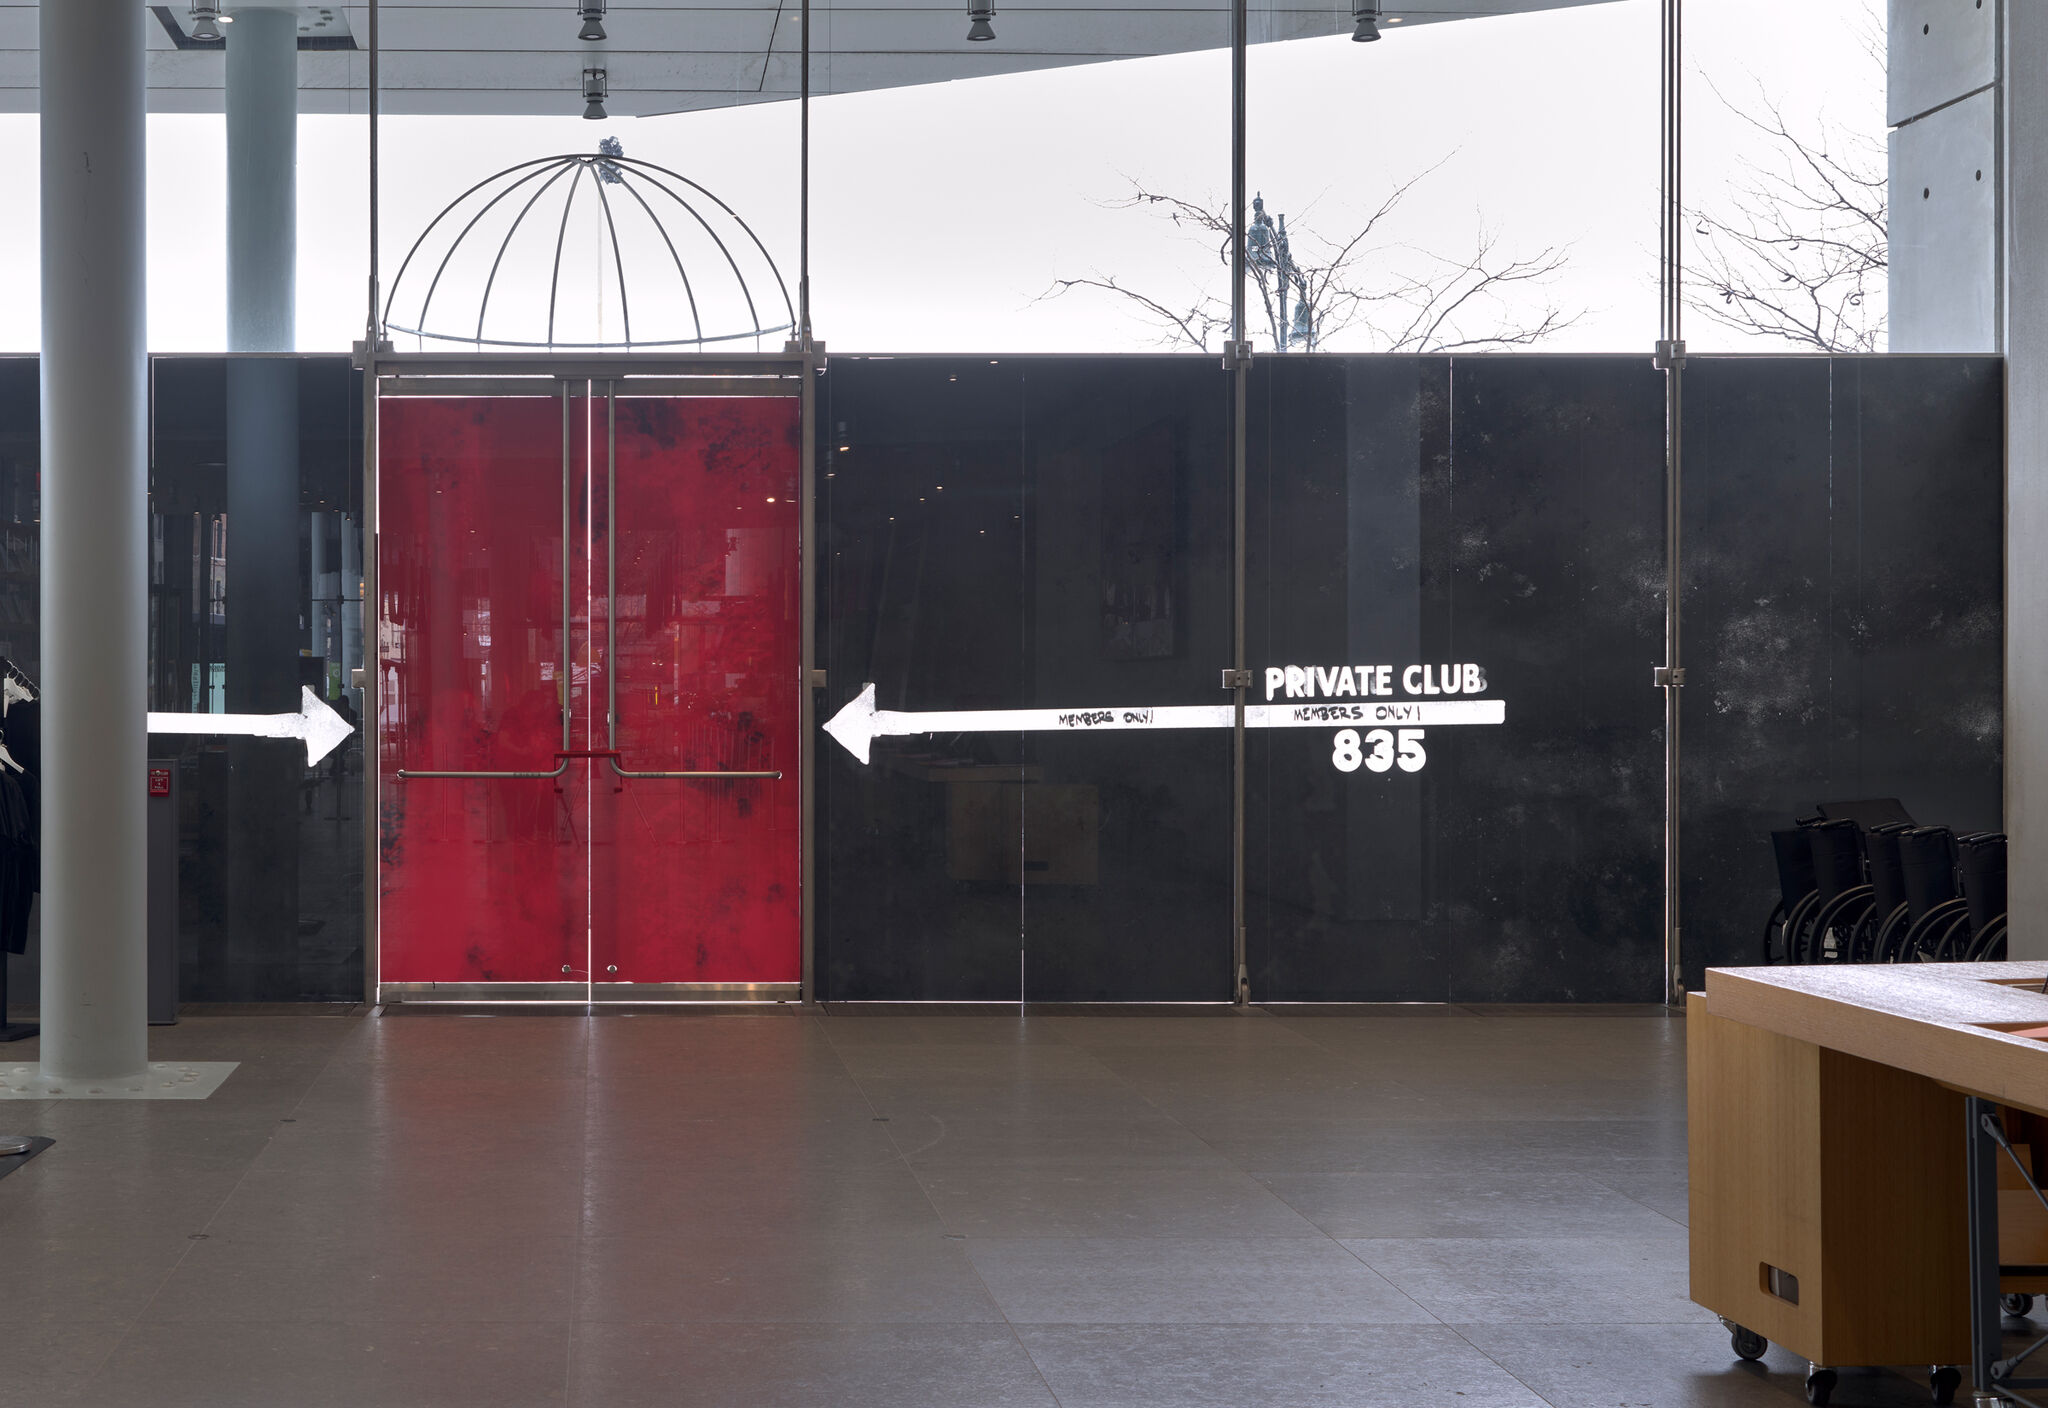 A red set of doors against a black backdrop, with white arrows and the words "Private Club 835".